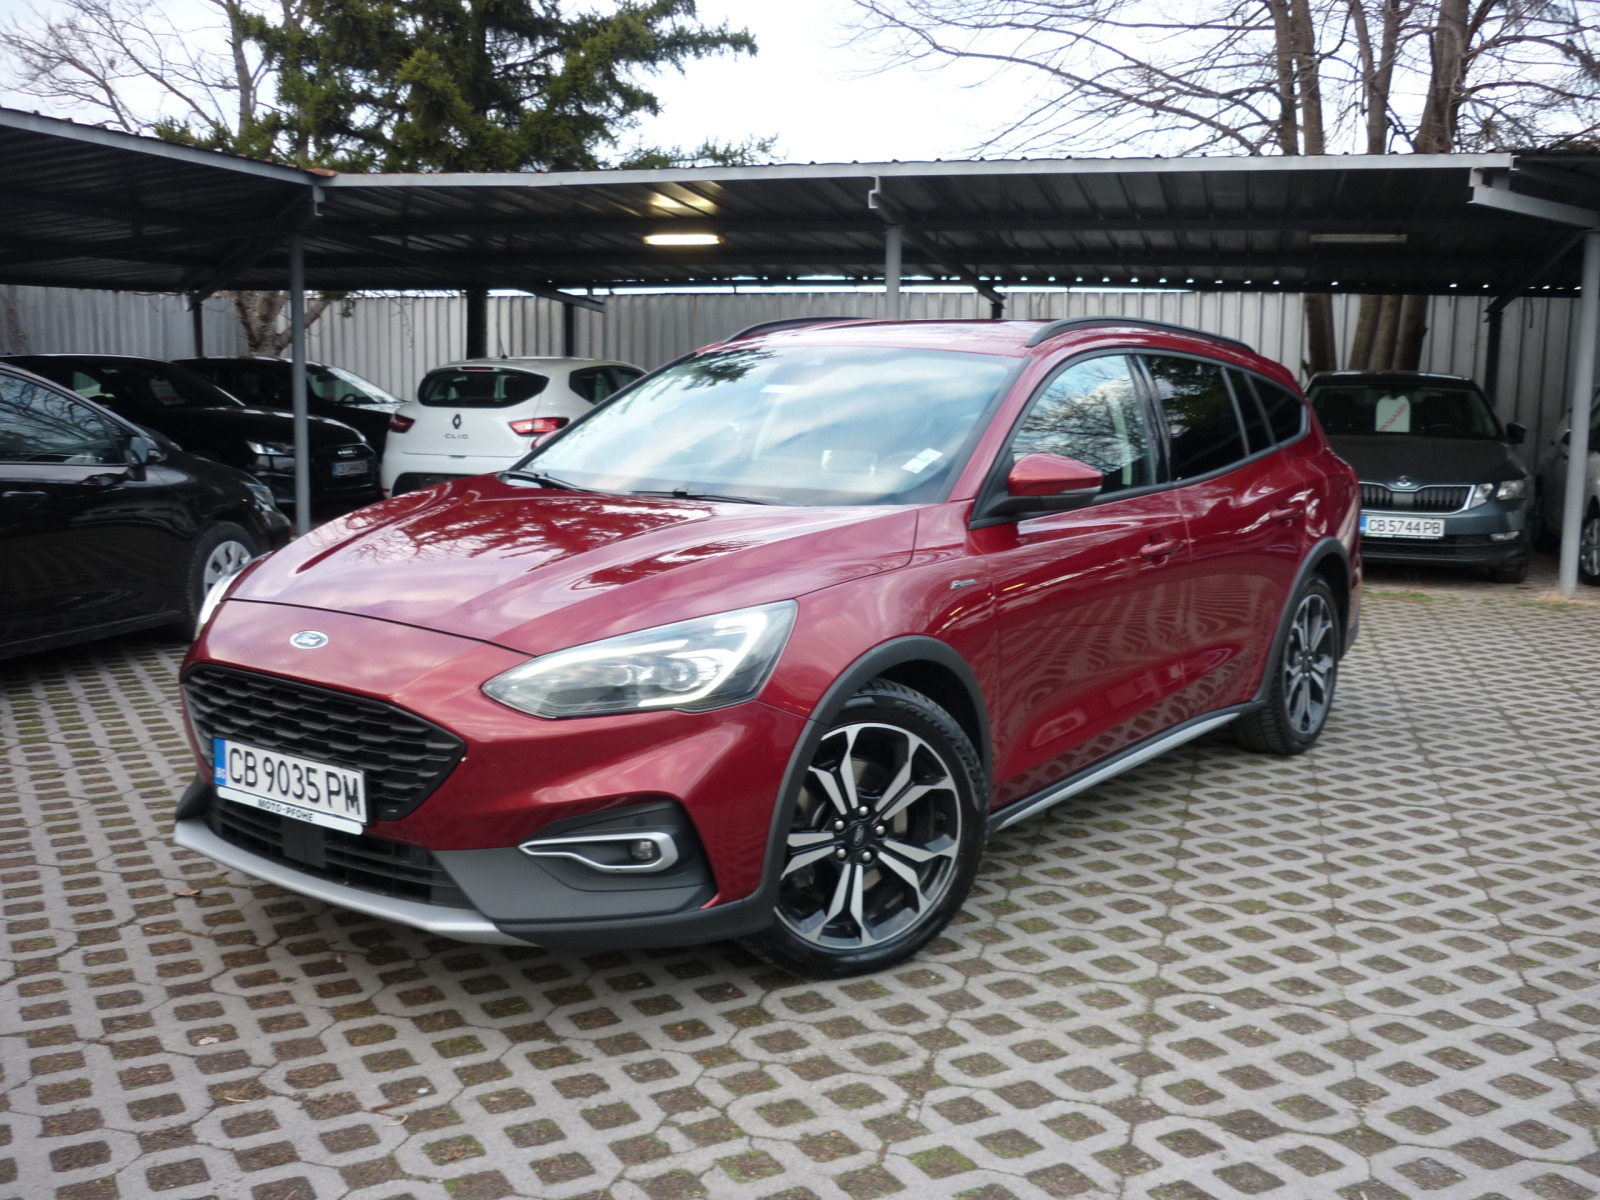 Ford Focus 1.5 150 HP Active  Ecoboost Automatic - изображение 1